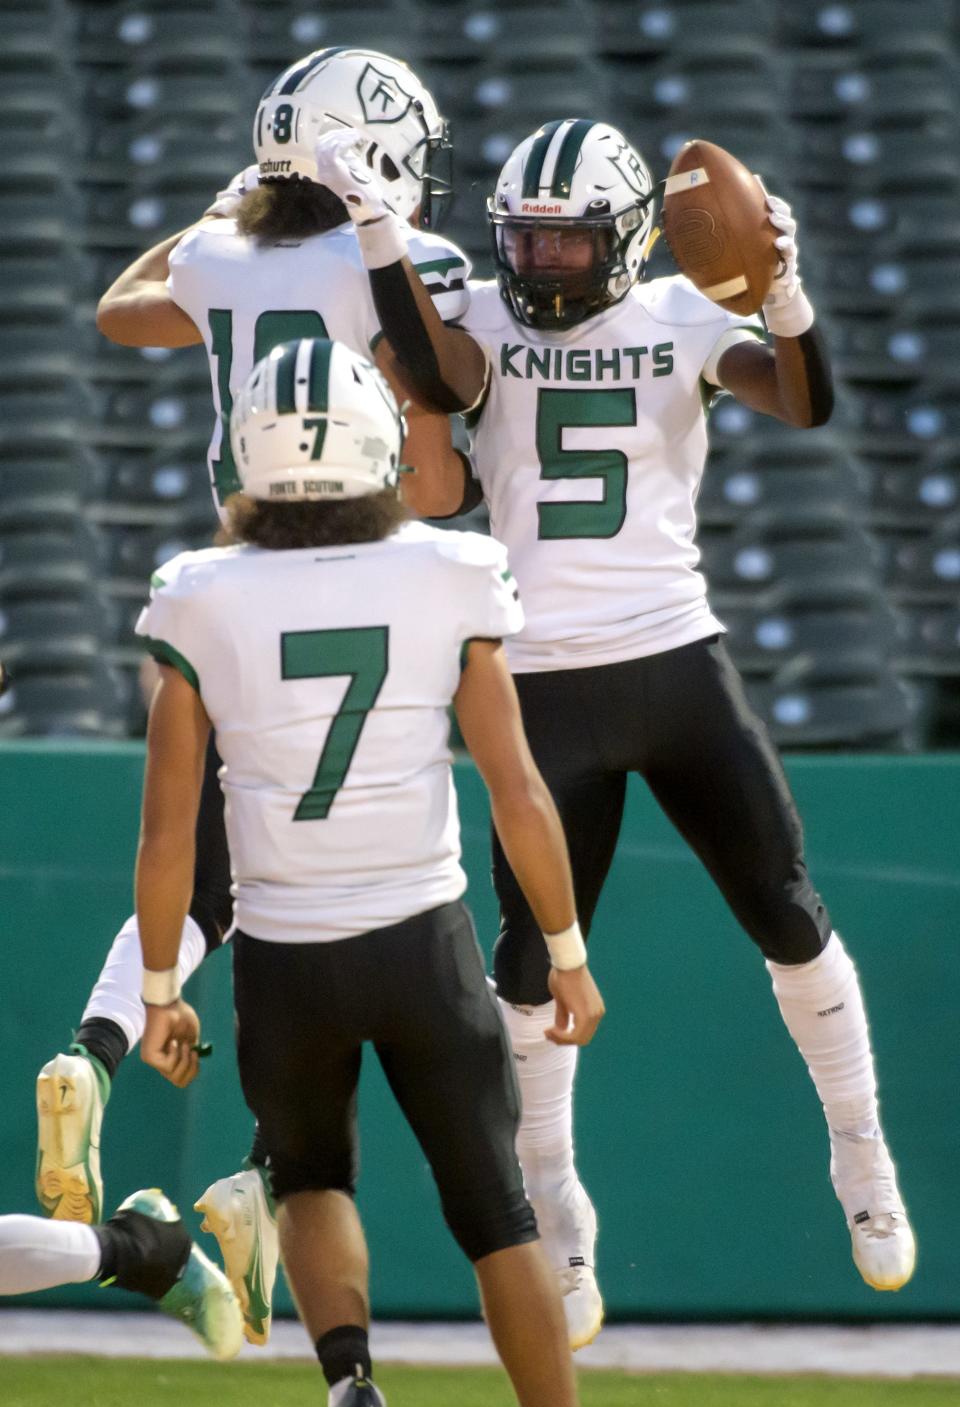 Richwoods' Cory Wysinger (5) celebrates a touchdown with his teammates against Peoria Notre Dame in the first half Friday, Sept. 16, 2022 at Dozer Park.